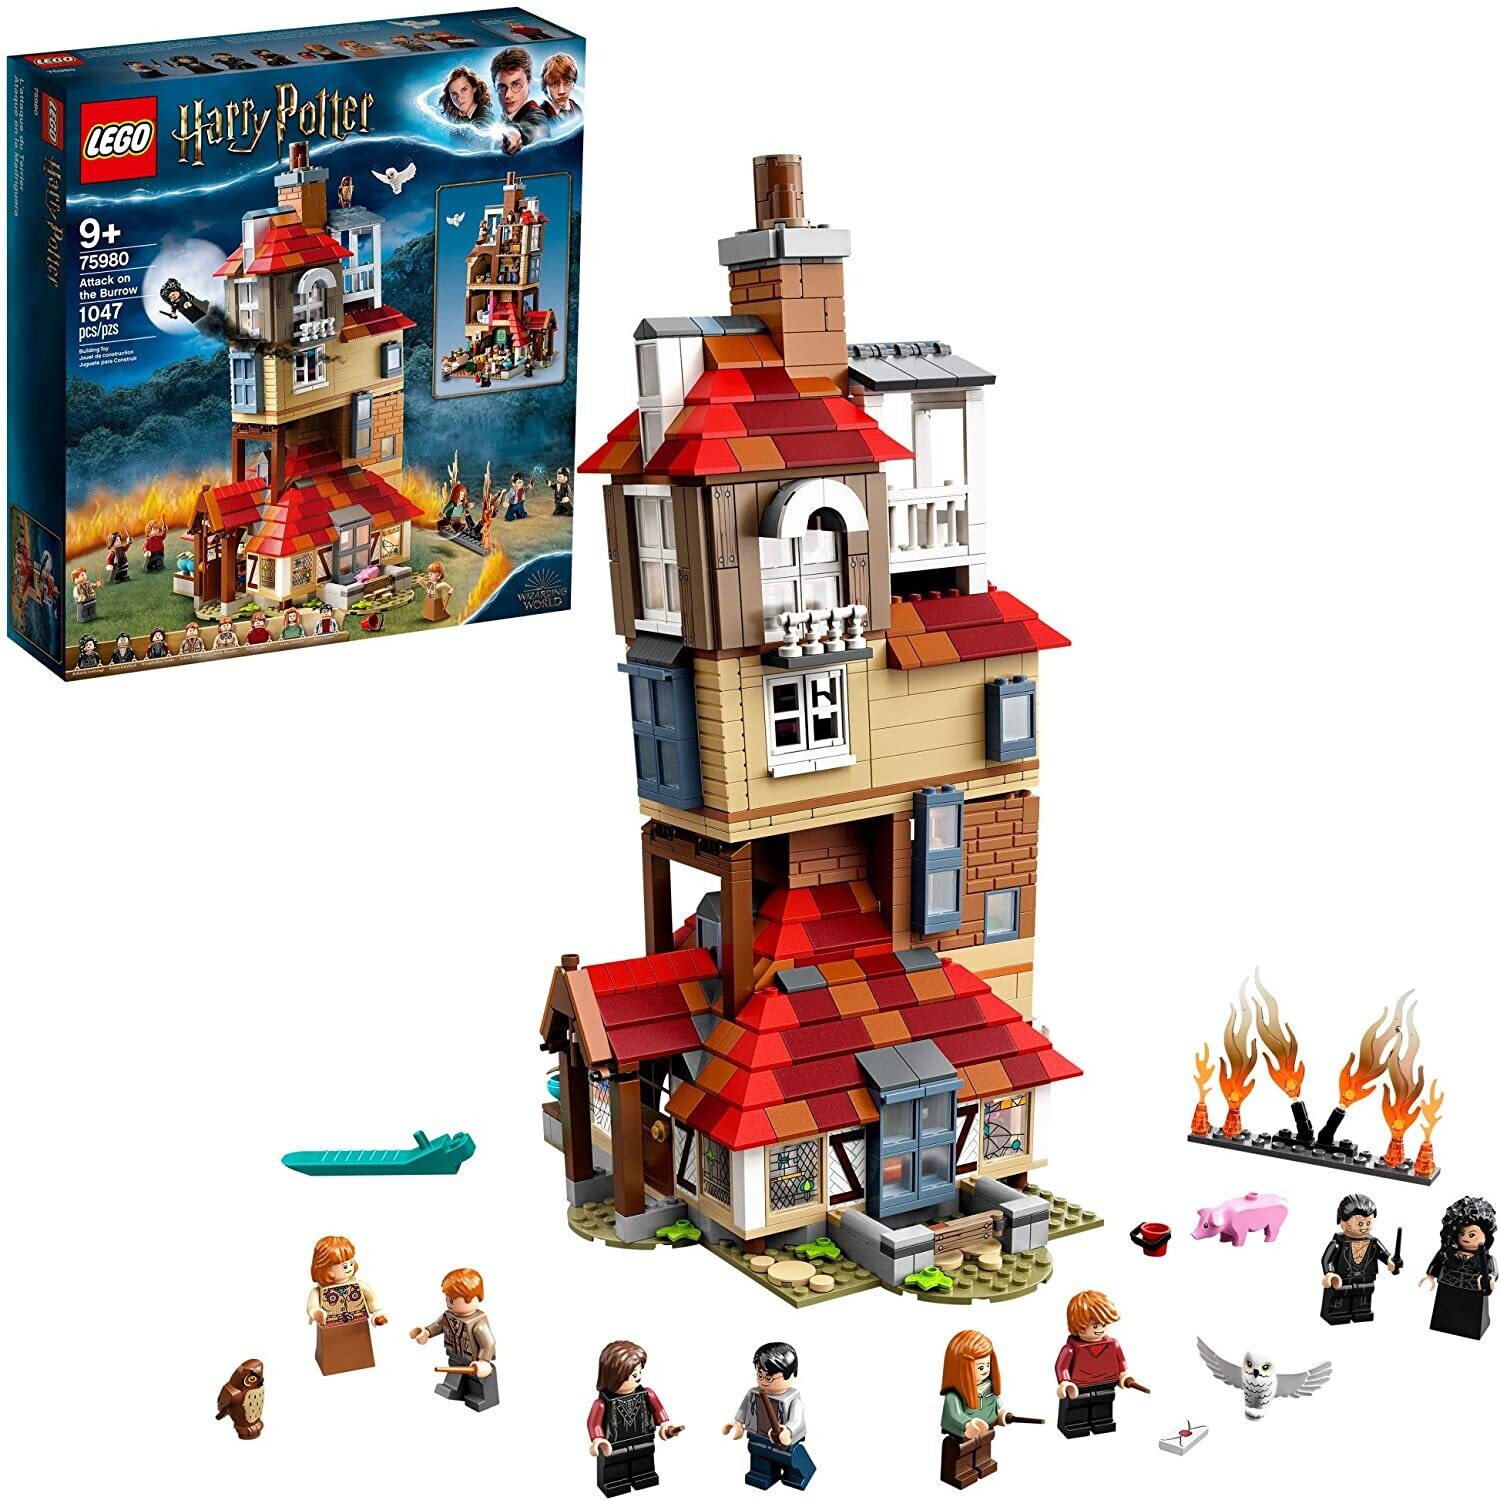 Lego 75980 Harry Potter Attack on the Burrow